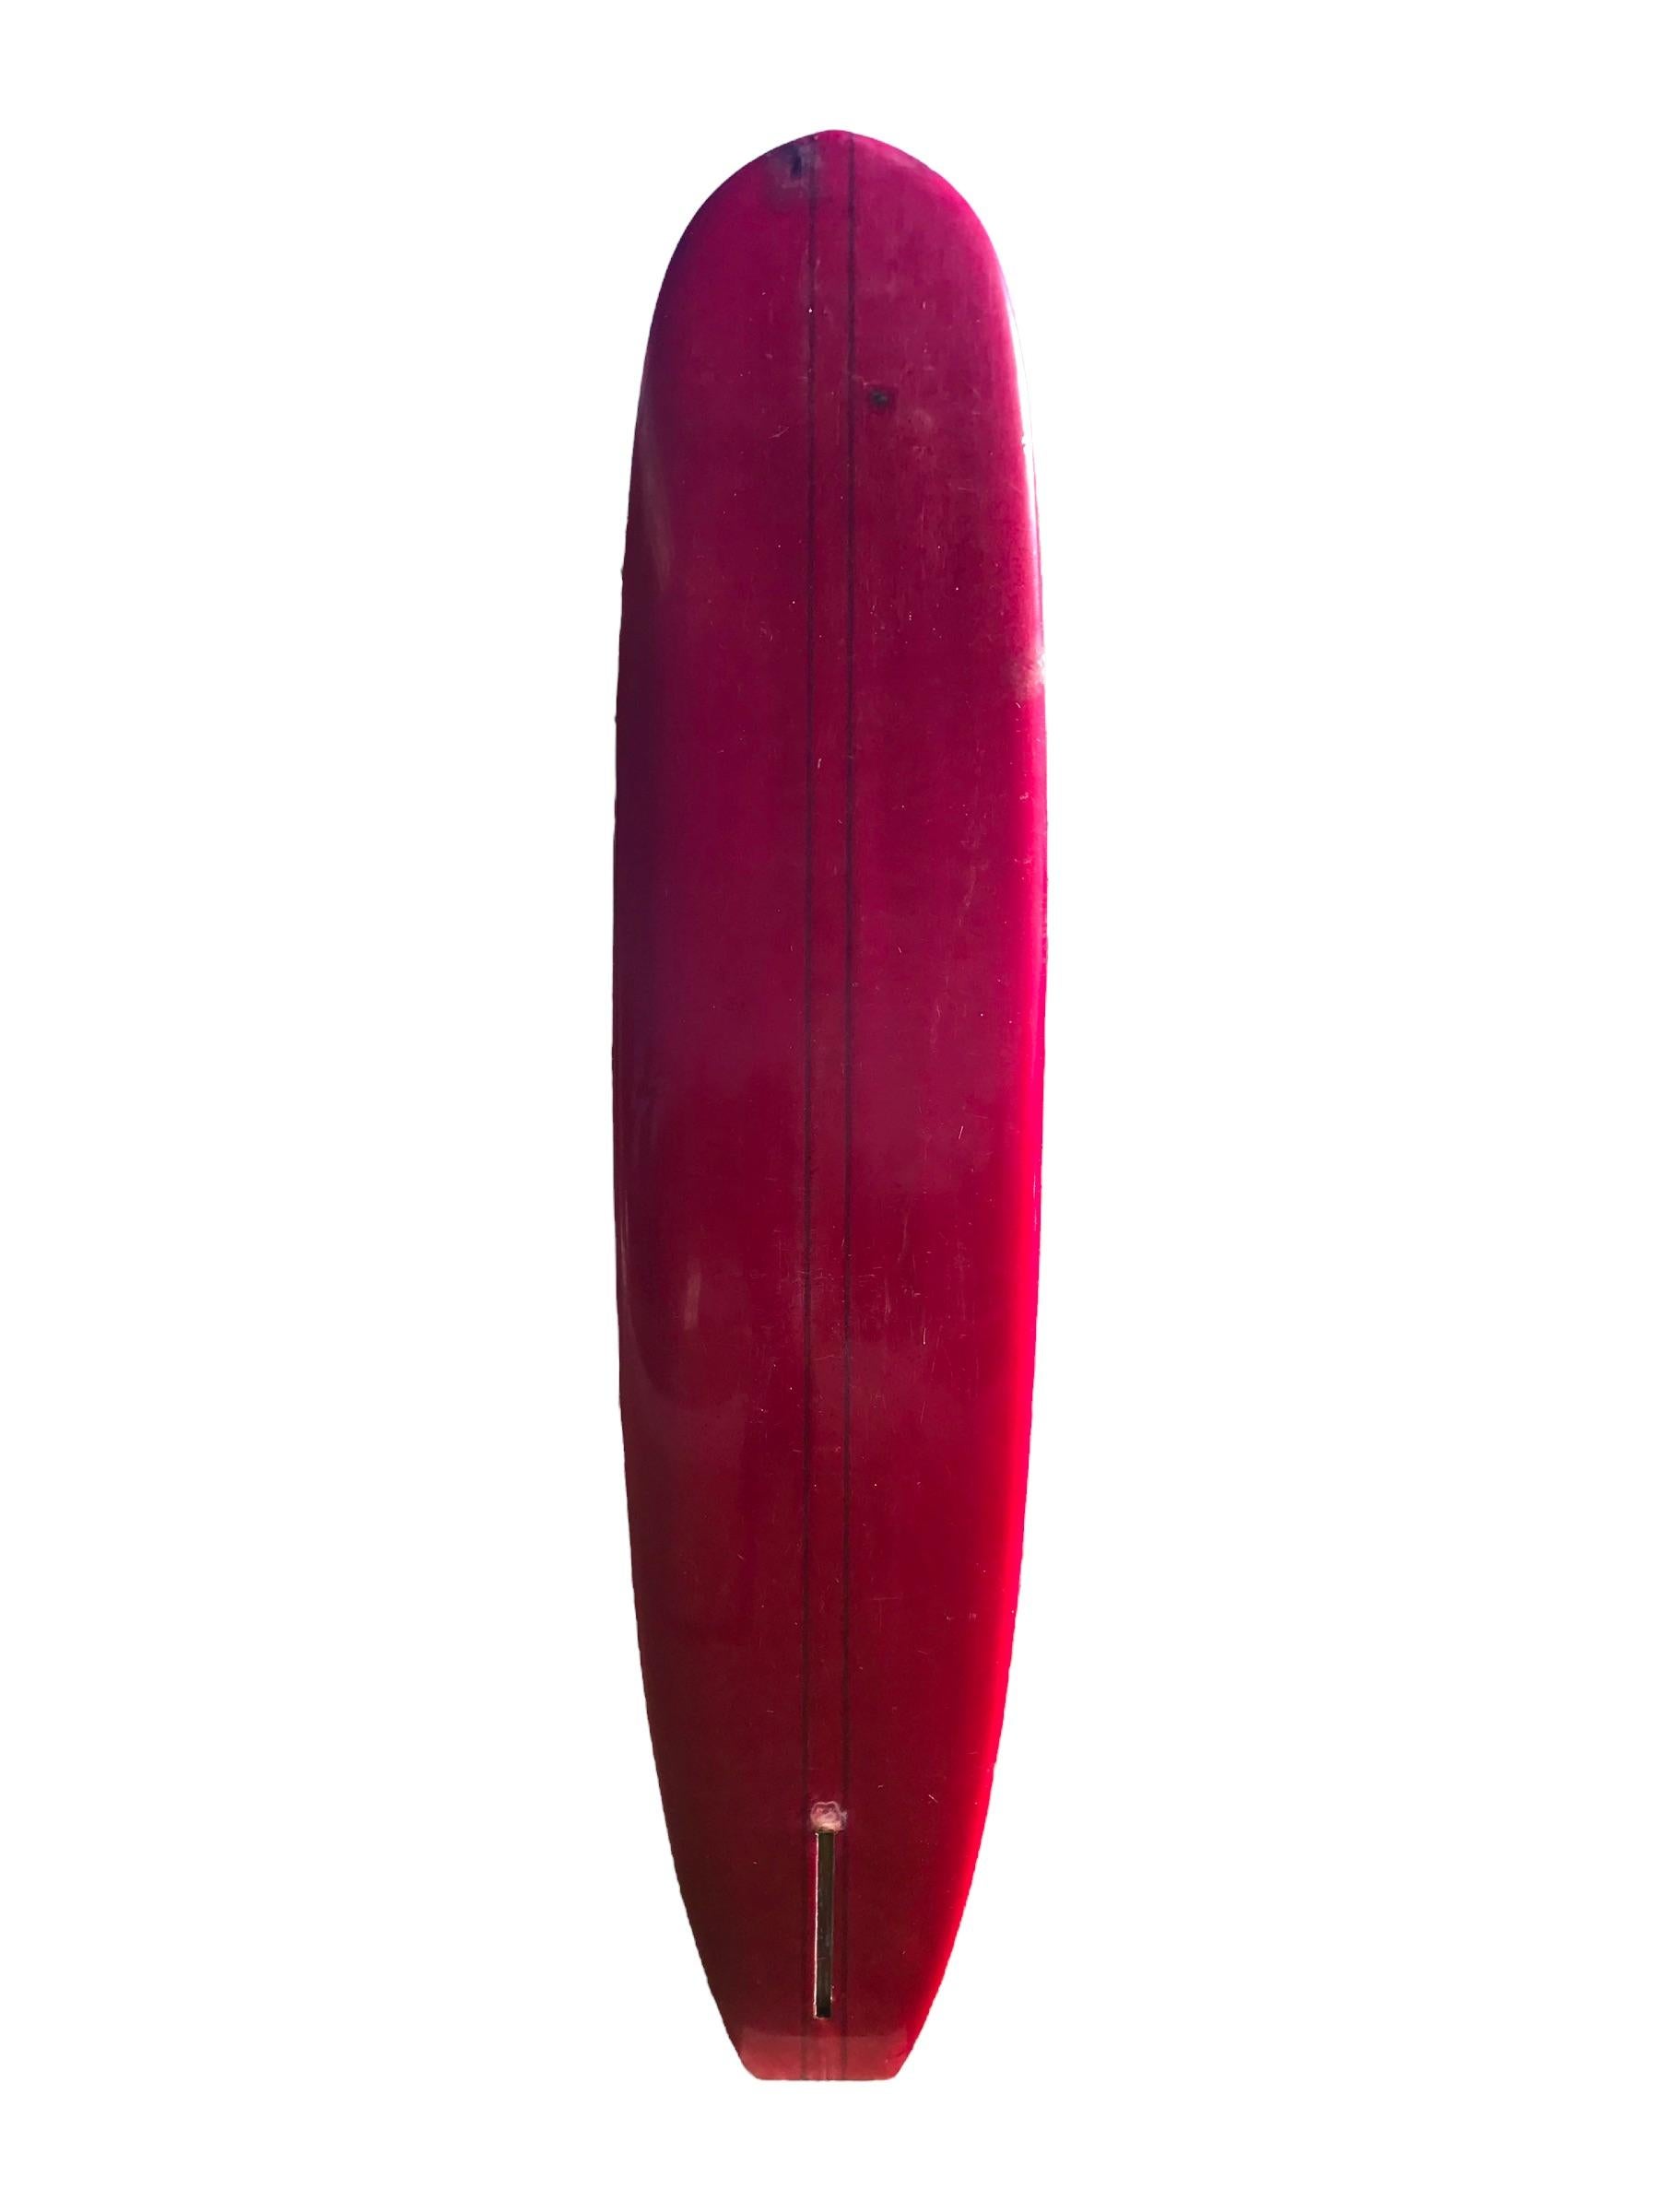 1967 Dewey Weber Performer model longboard. Features a double stringer shape design with beautiful burgundy and orange tints. Black pinstriping and hatchet fin complete with original “Wonderbolt” fin screw. A remarkable all original example of one